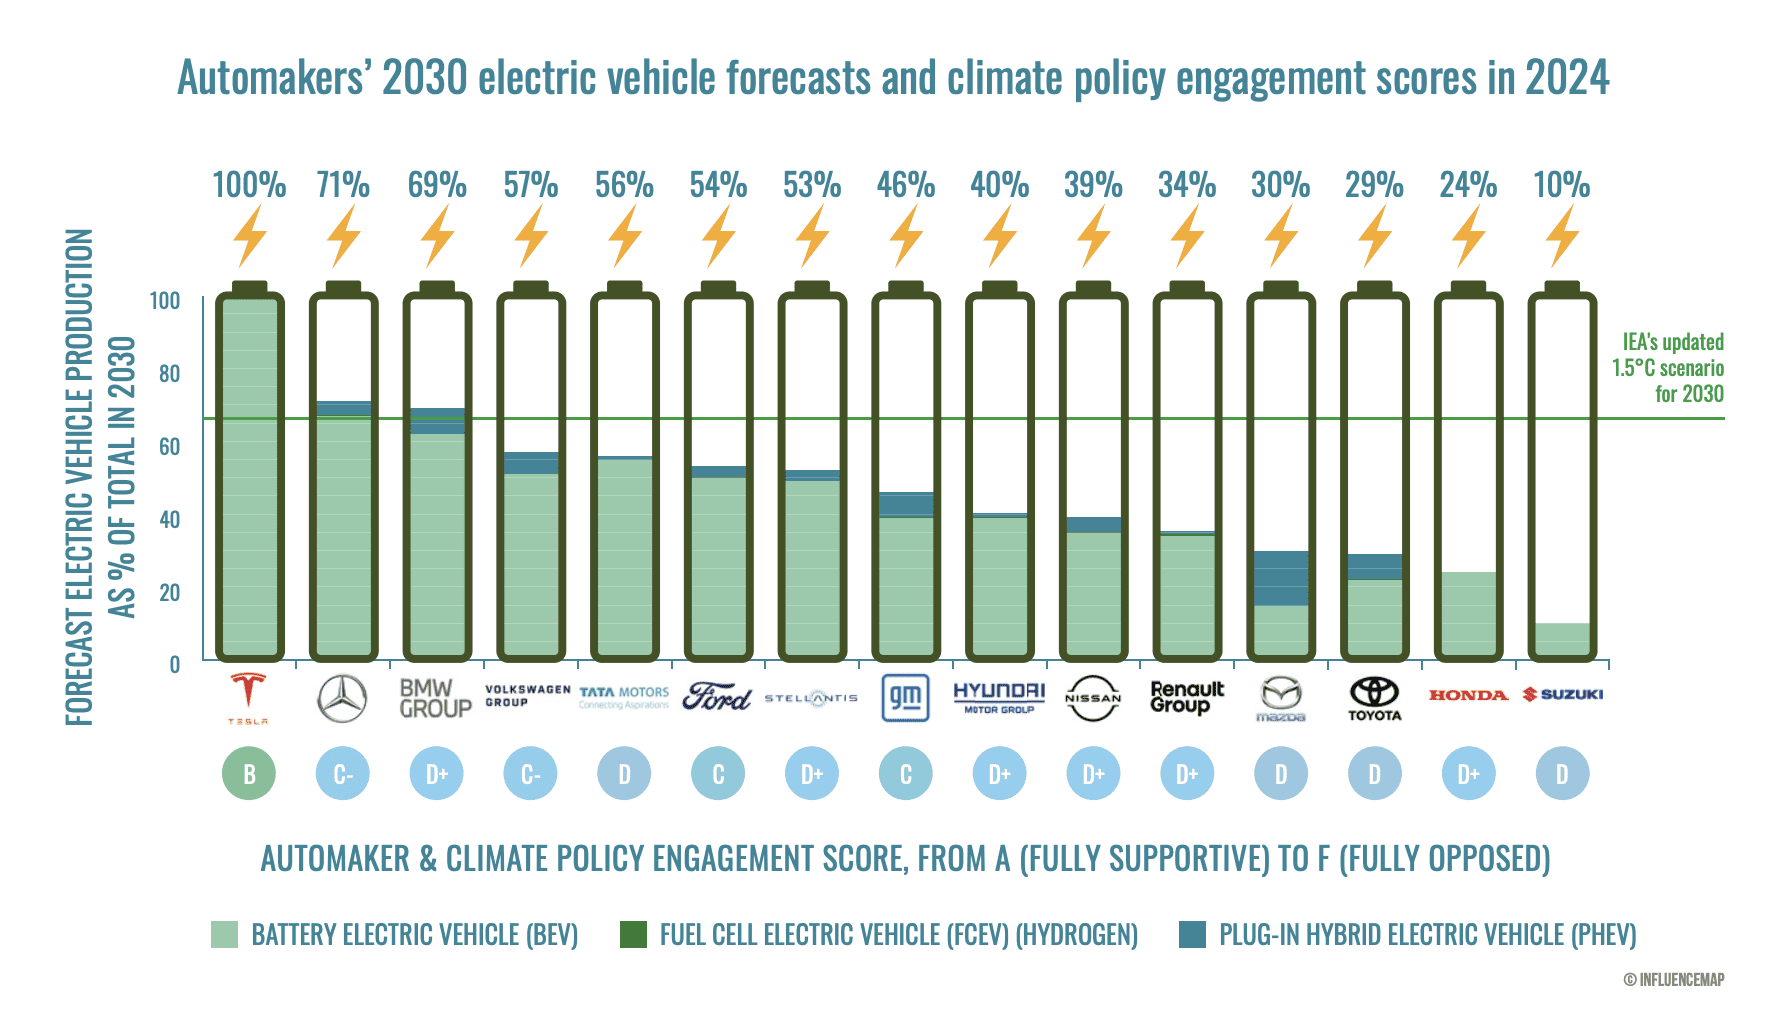 Automaker and climate policy engagement score